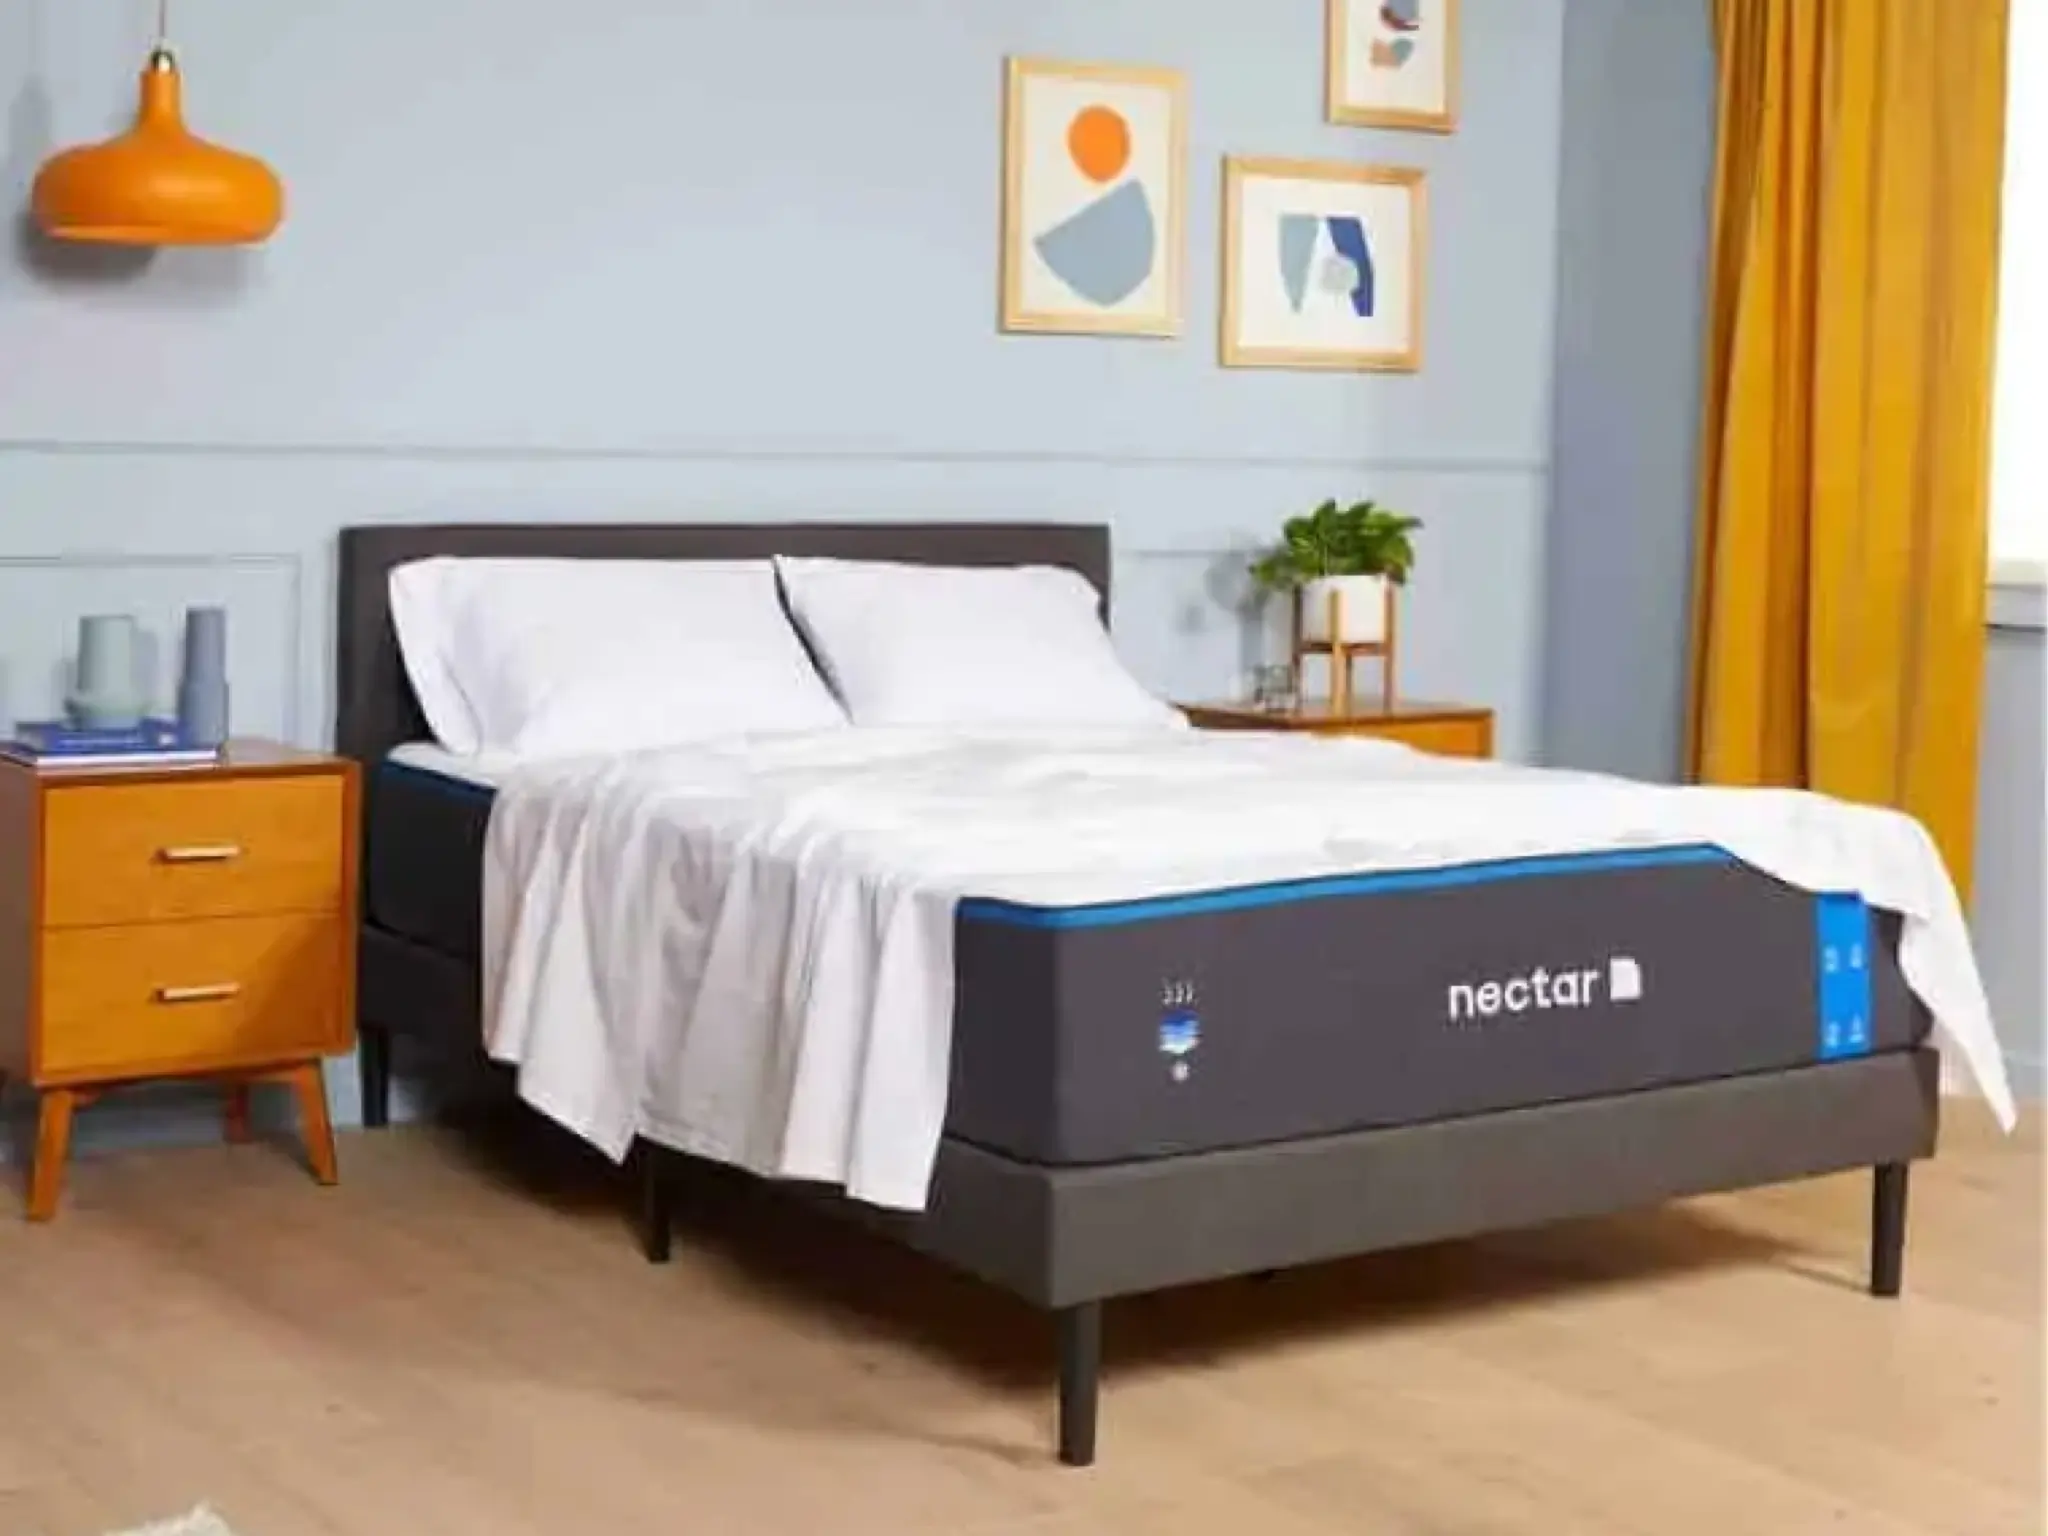 How Long Can The Nectar Mattress Stay In The Box?